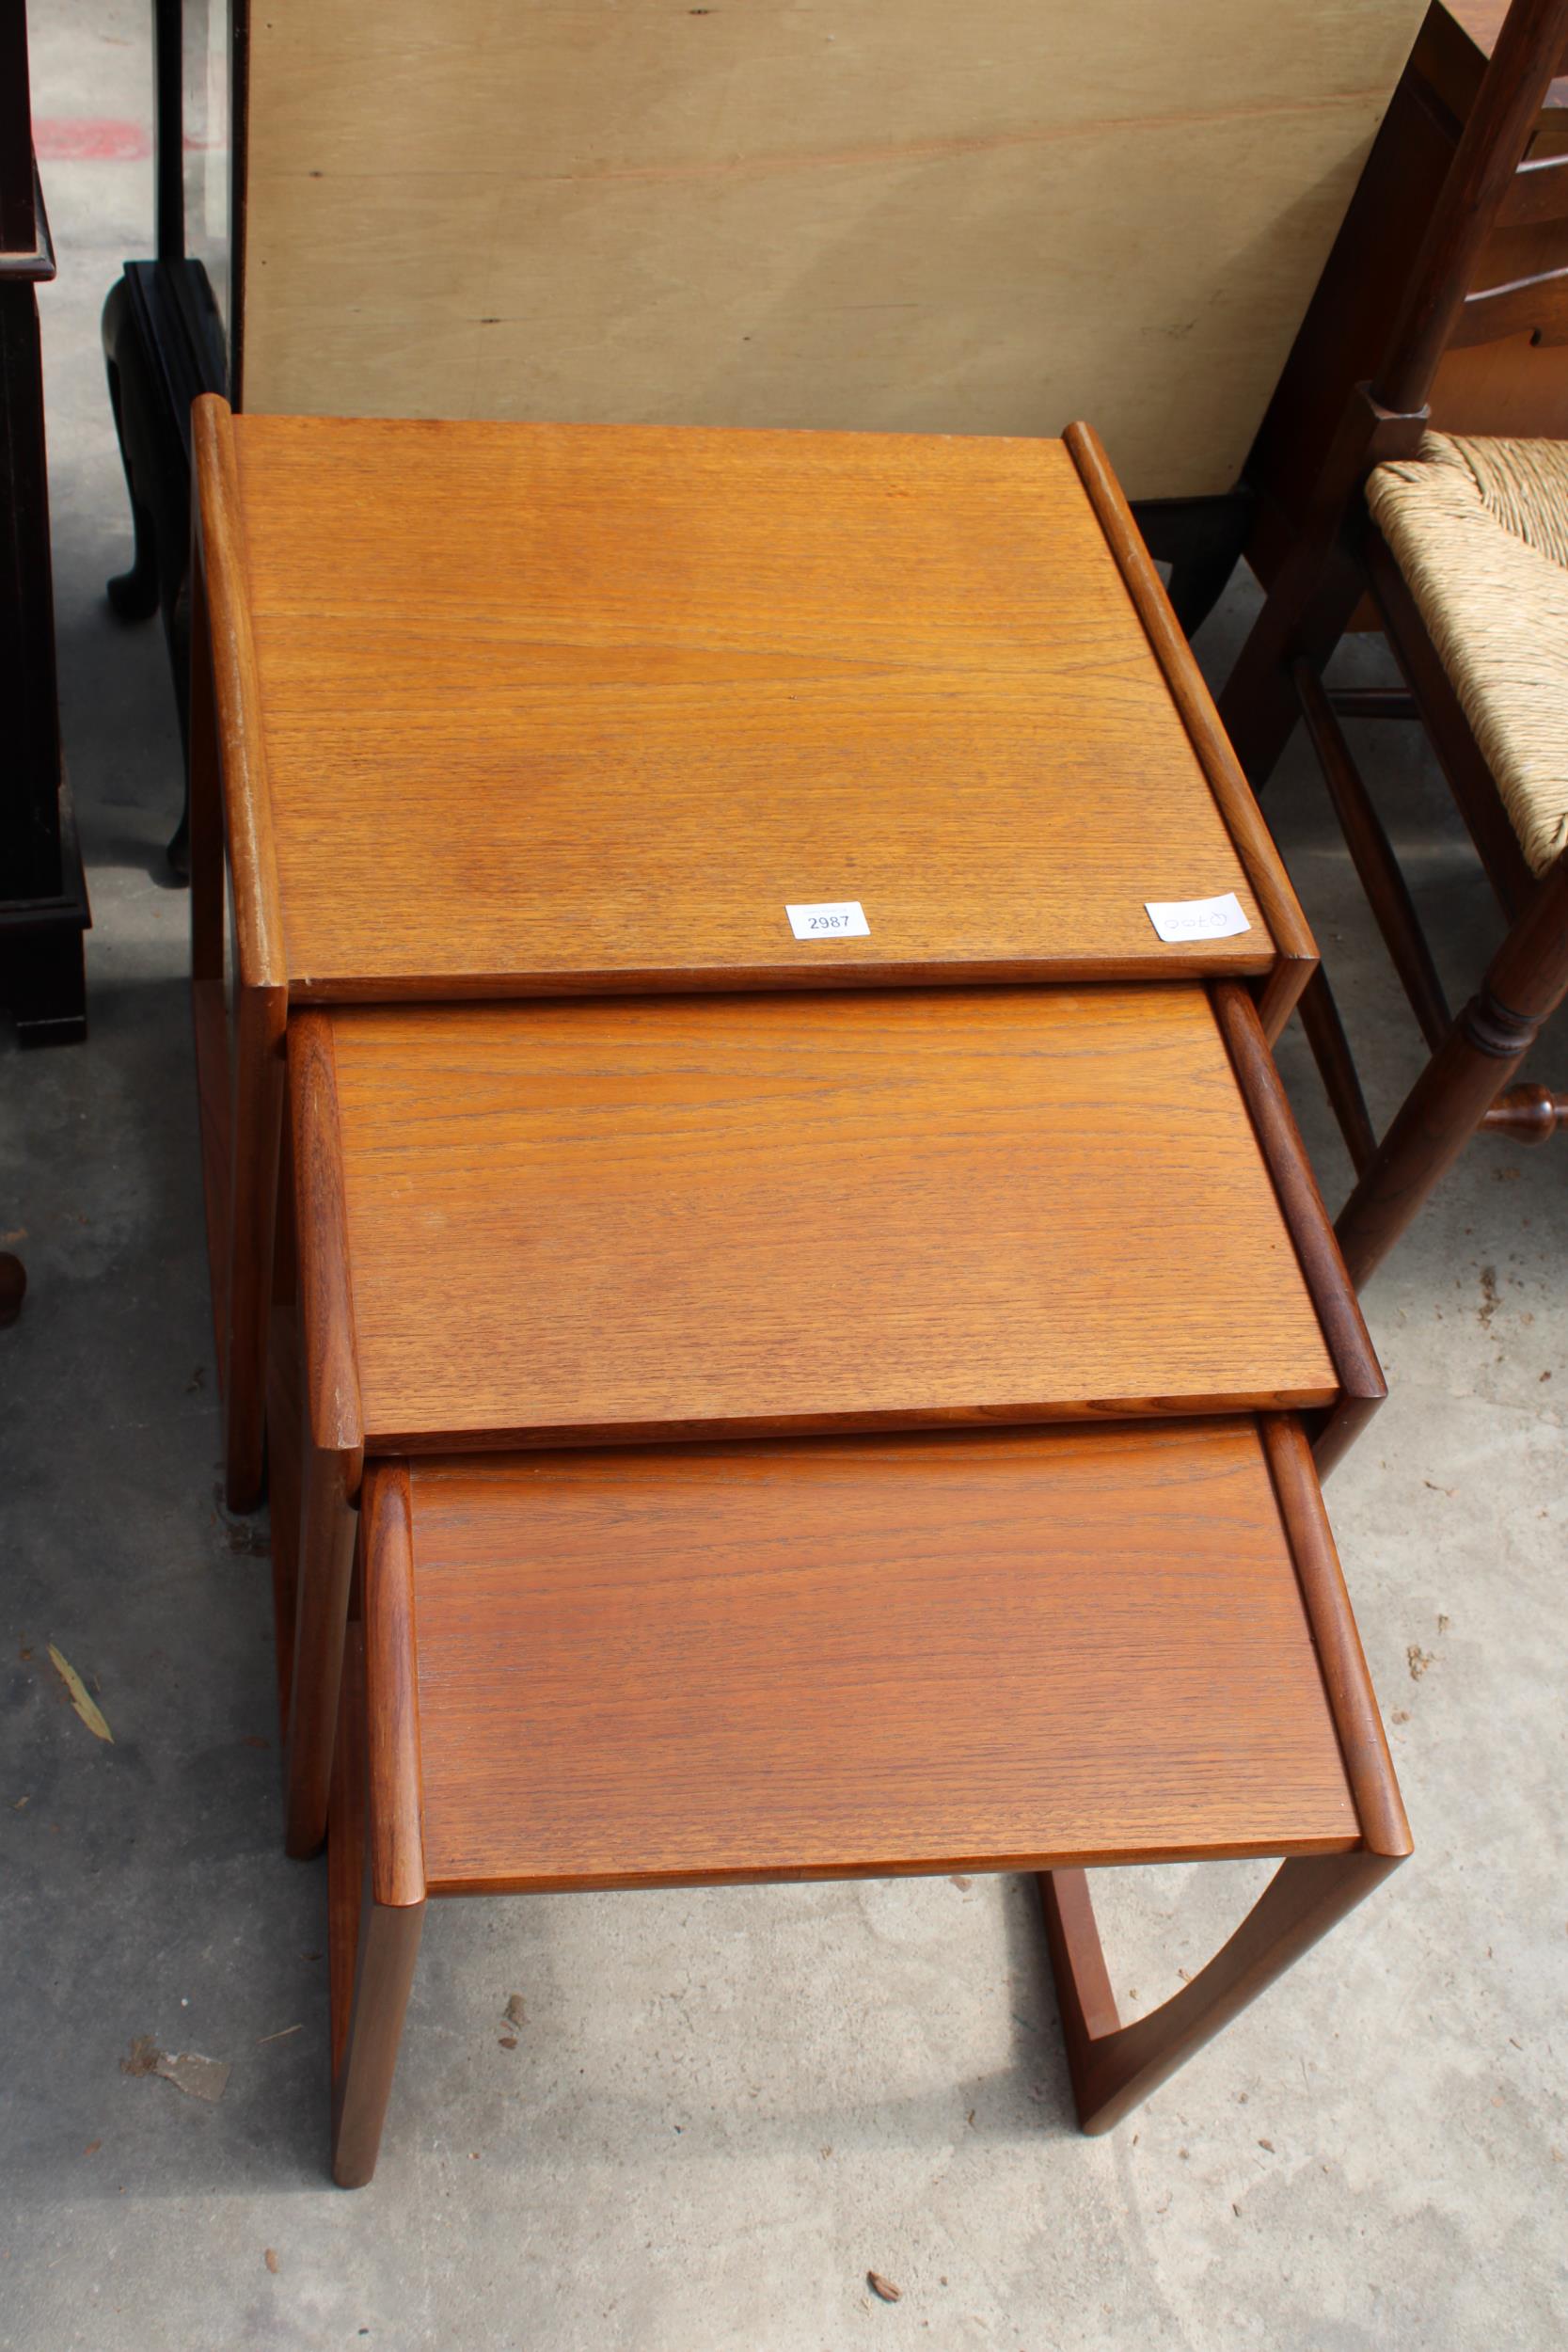 A RETRO NEST OF THREE G.PLAN TABLES - Image 2 of 3